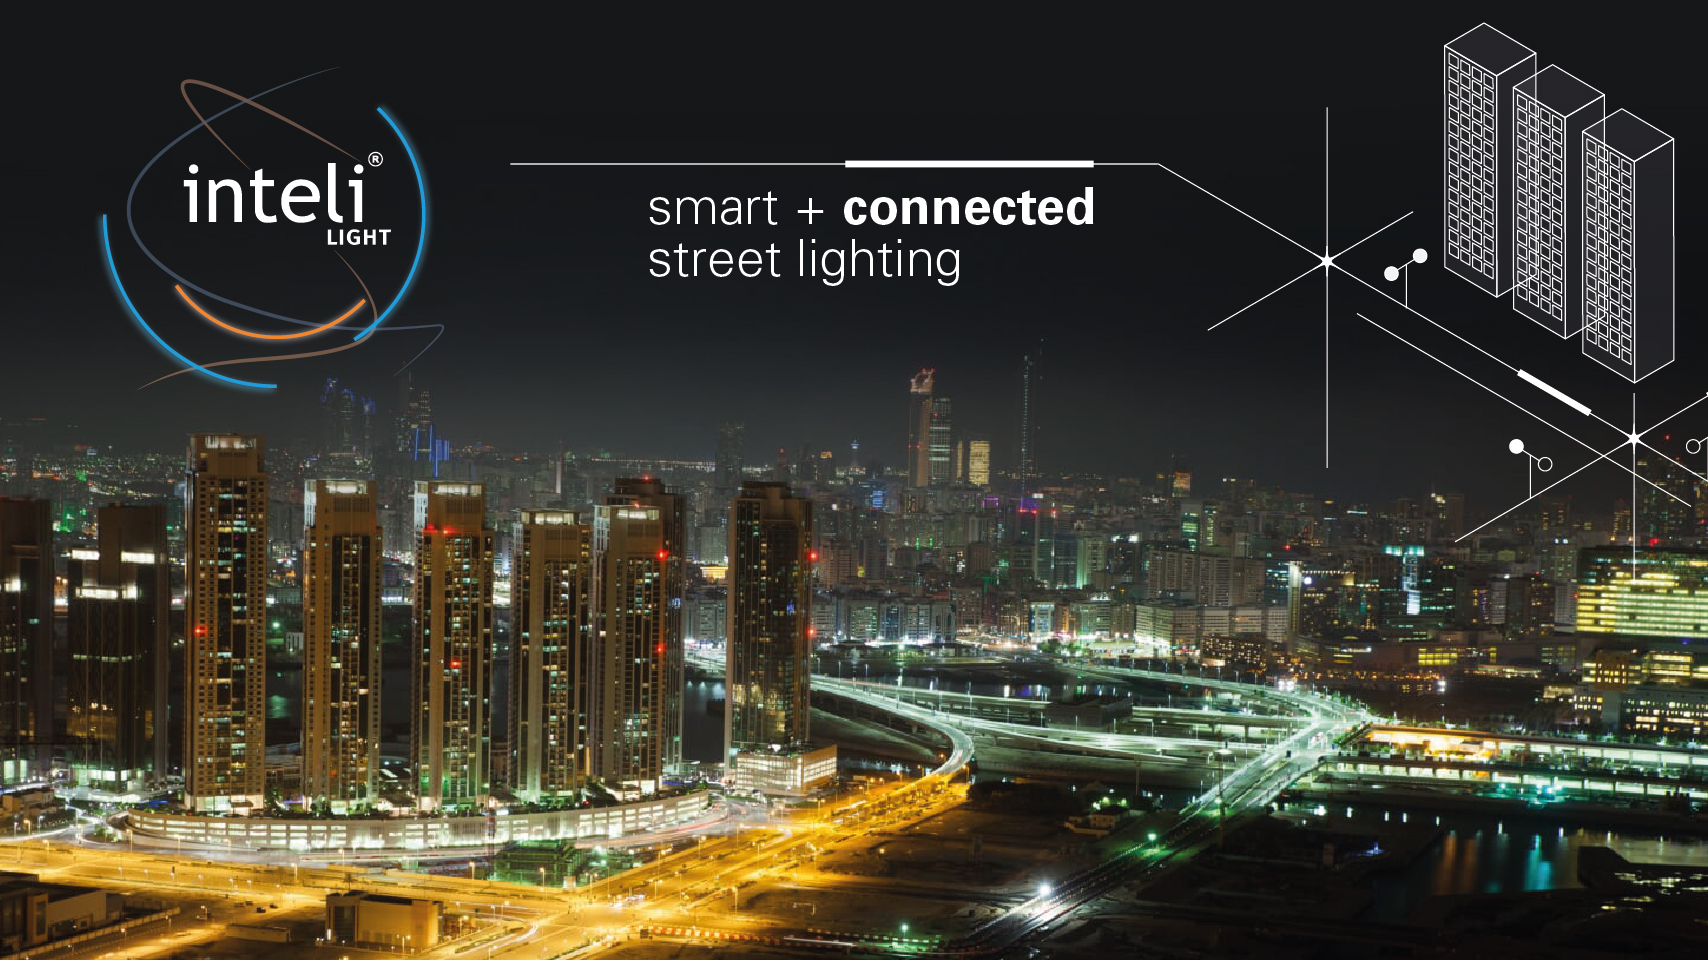 inteliLIGHT® streetlight controllers have been installed in Abu Dhabi for a smart city prototype based on Sigfox connectivity